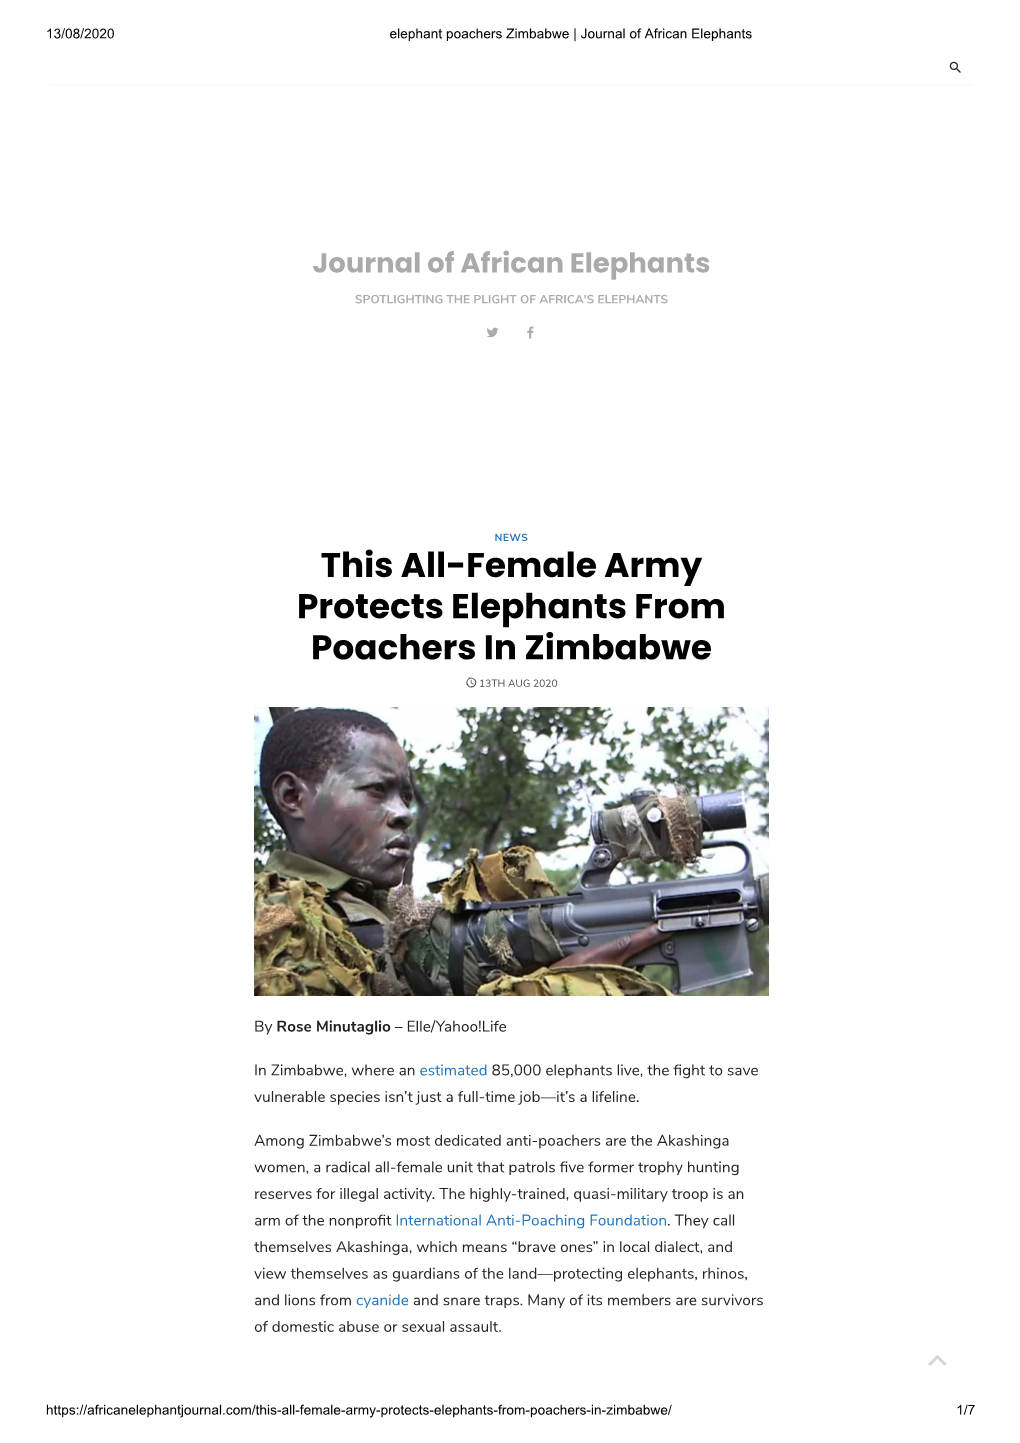 This All-Female Army Protects Elephants from Poachers in Zimbabwe  13TH AUG 2020